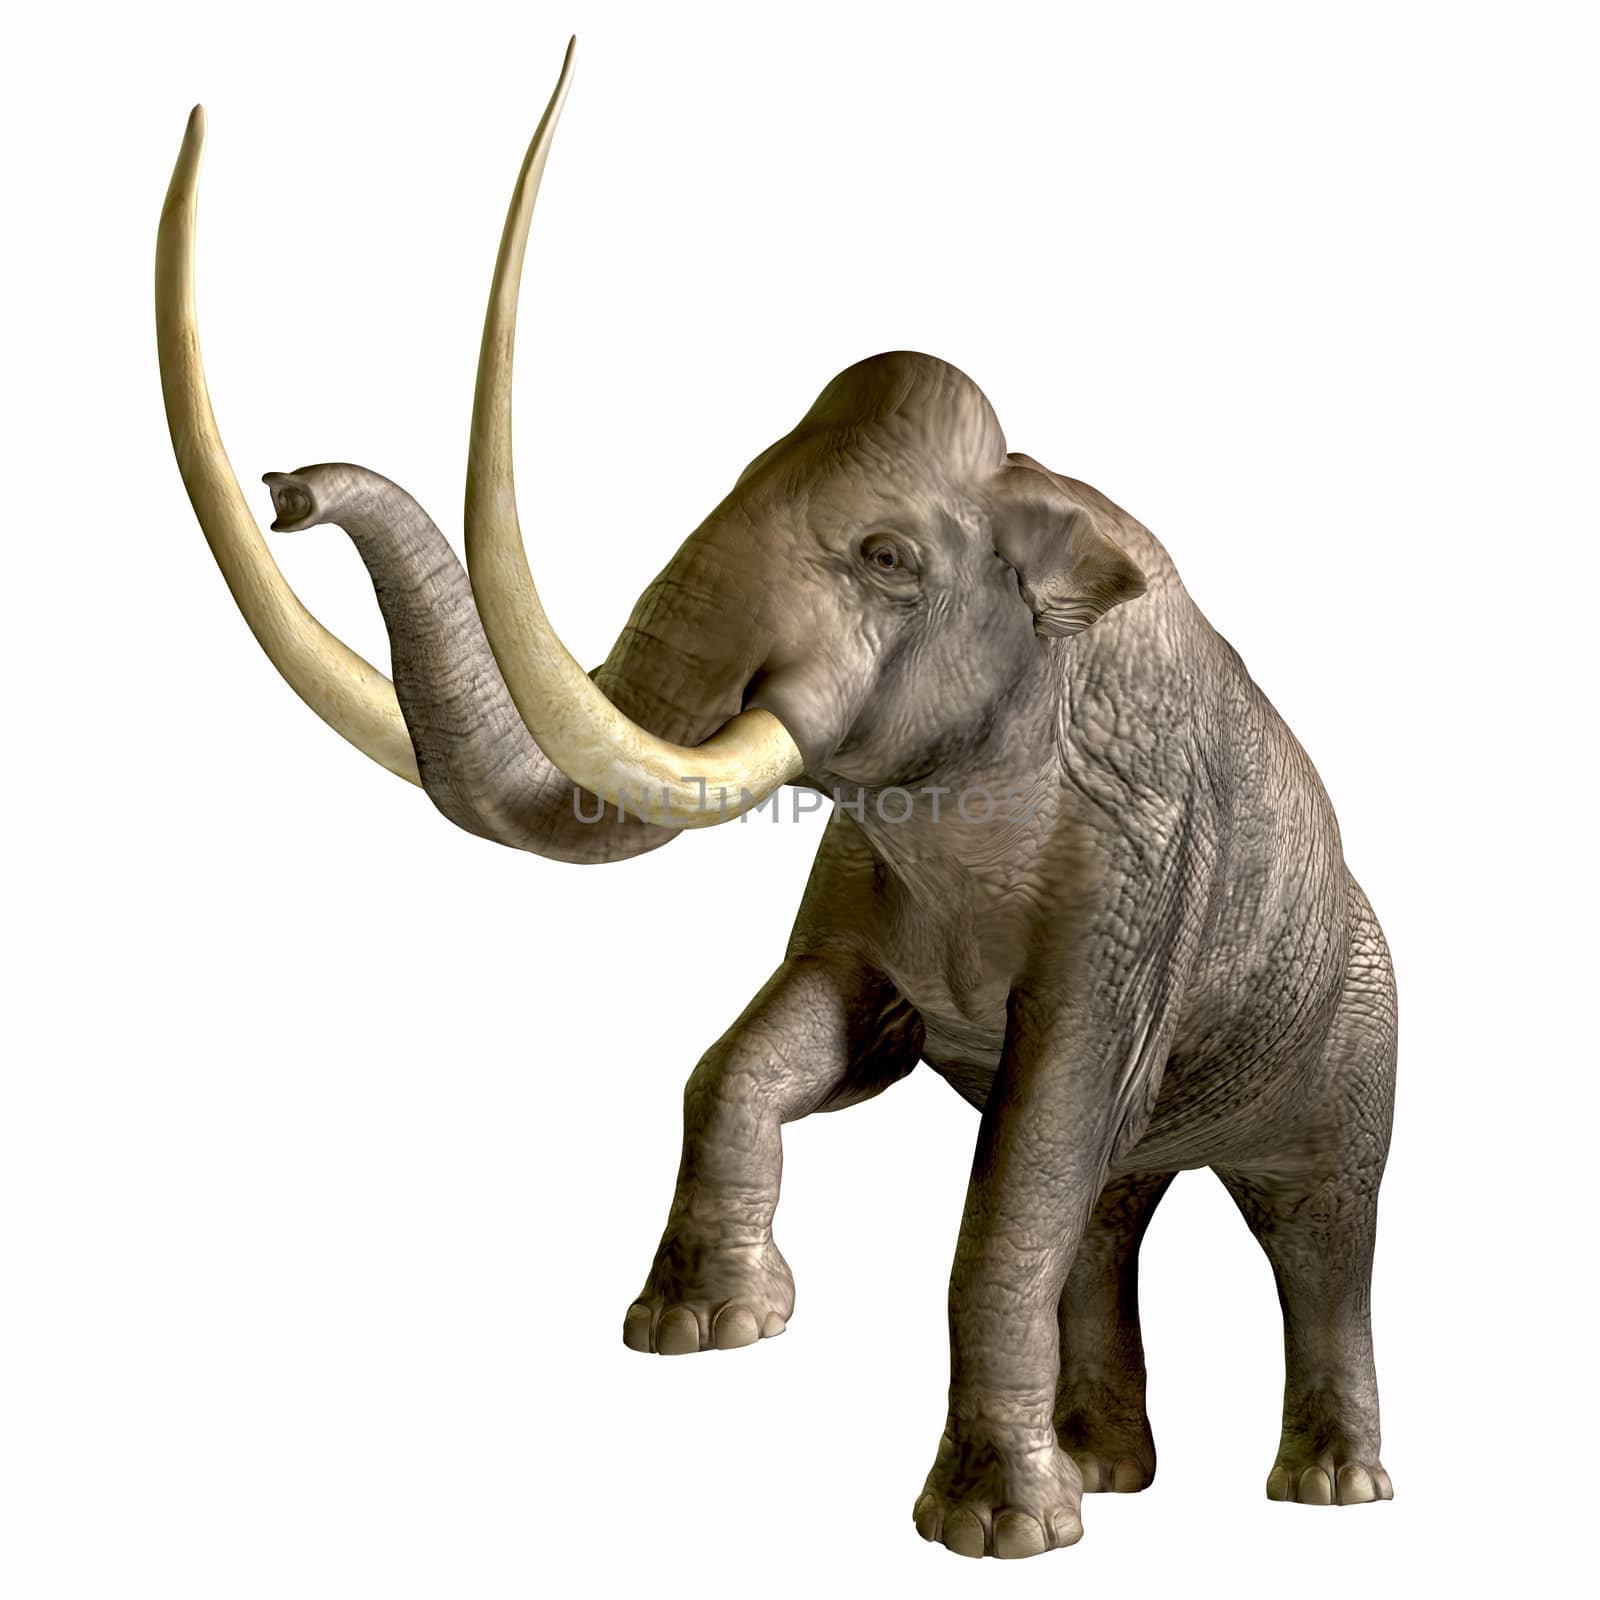 The Columbian Mammoth is one of an extinct megafauna beasts from the Pleistocene Period of Earths history. Its fossils have been discovered in North America and as far south as Nicaragua and Hondurus.